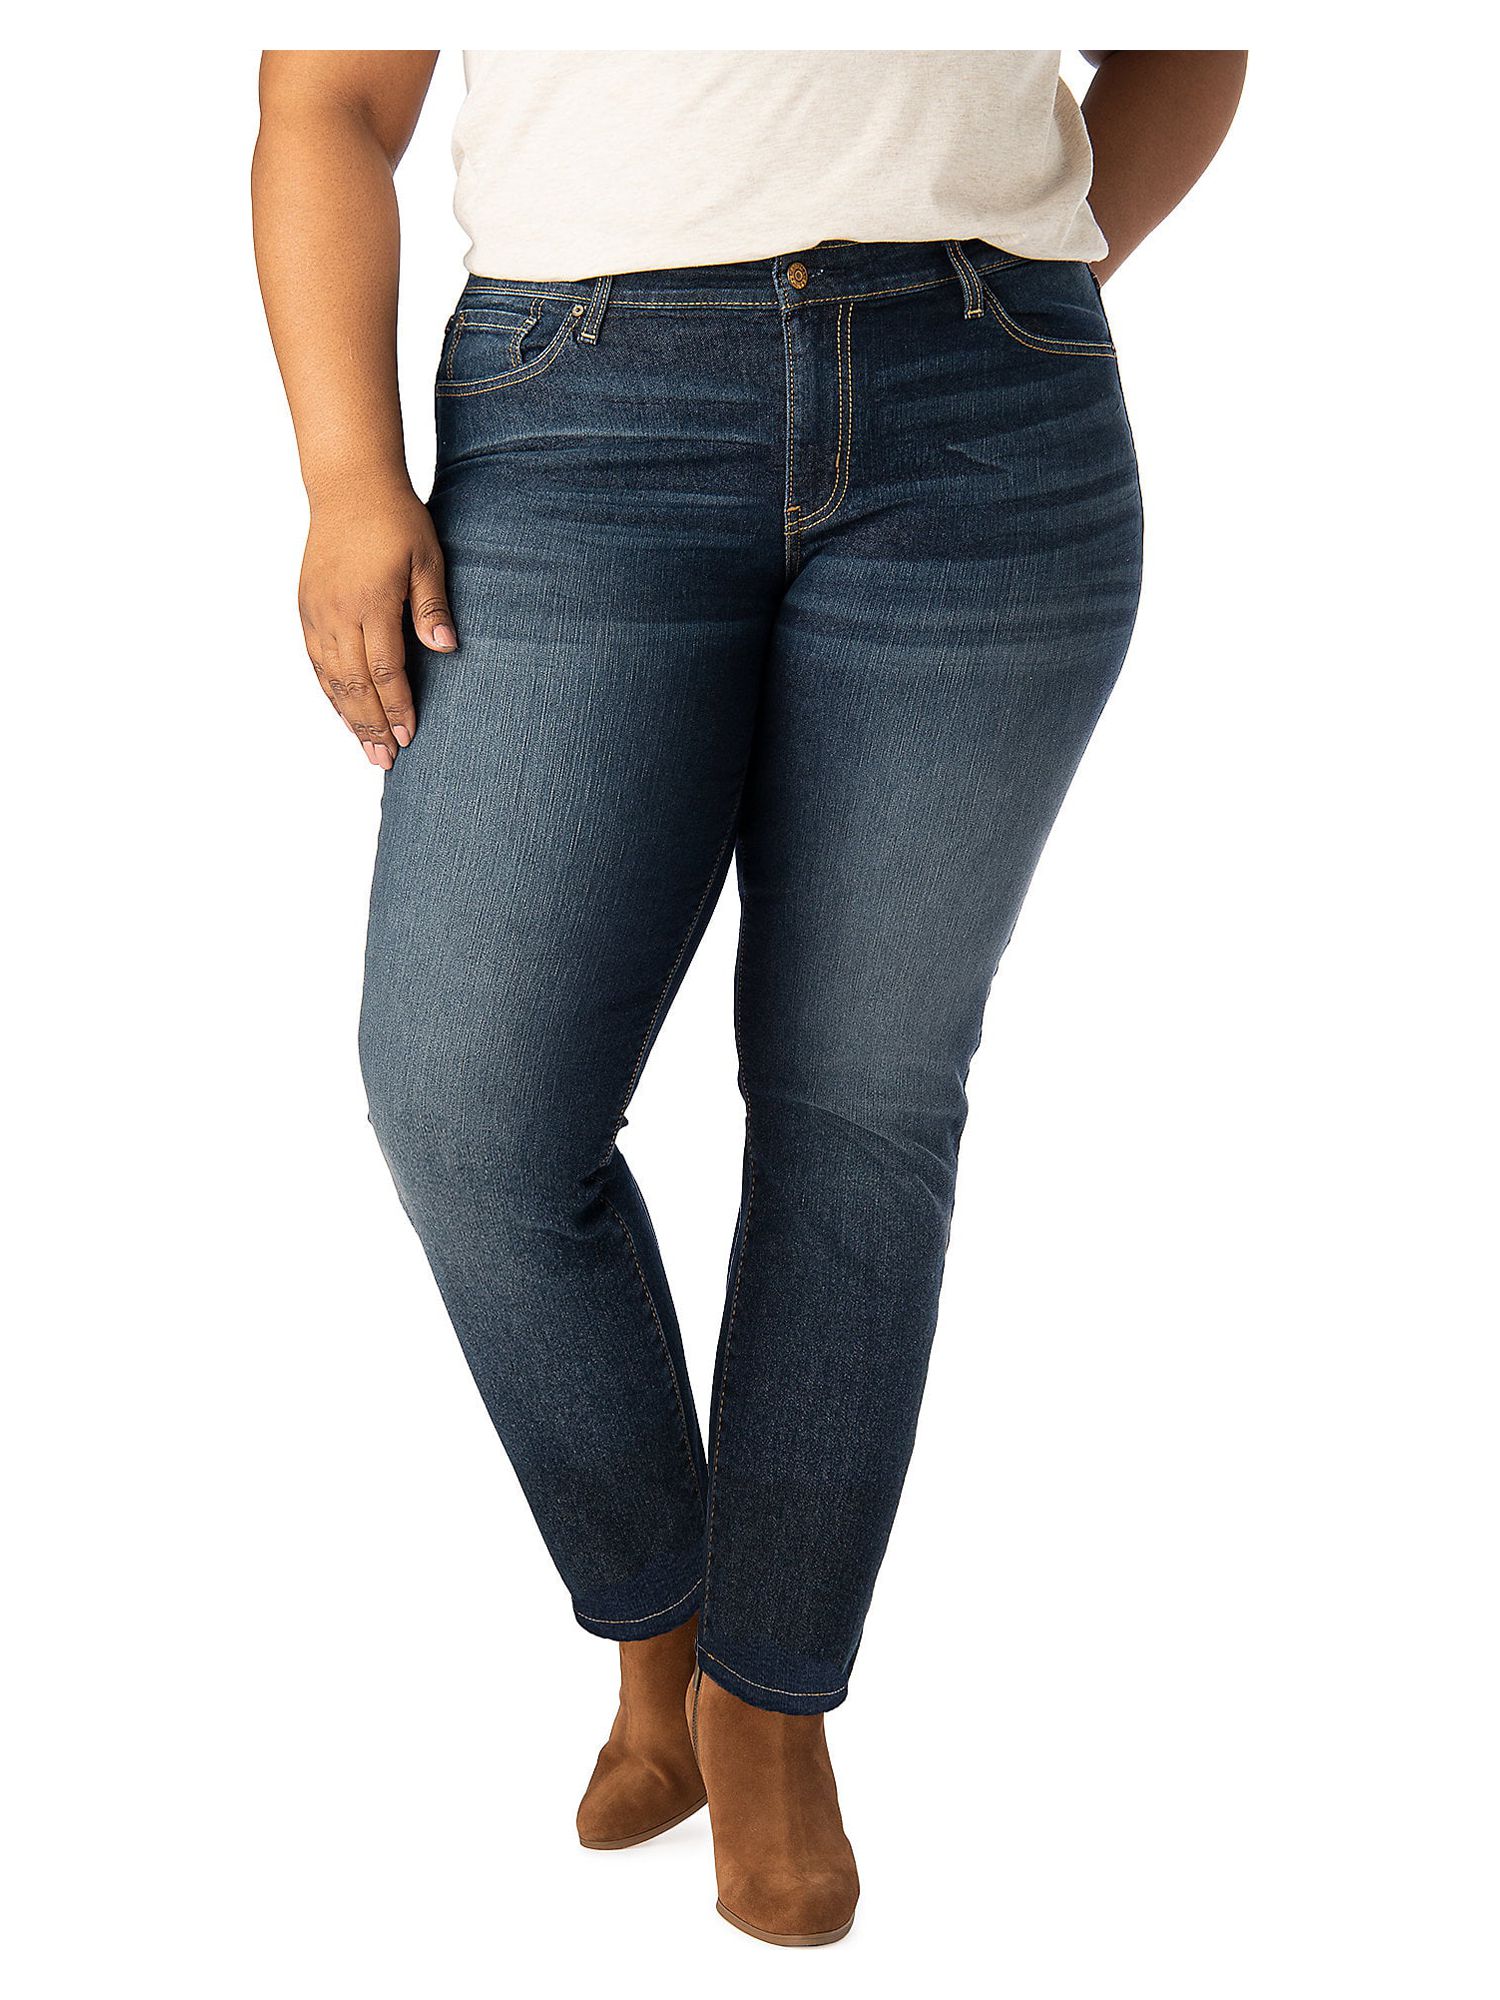 Signature by Levi Strauss & Co. Women's Modern Mid-Rise Straight Jeans - image 4 of 9